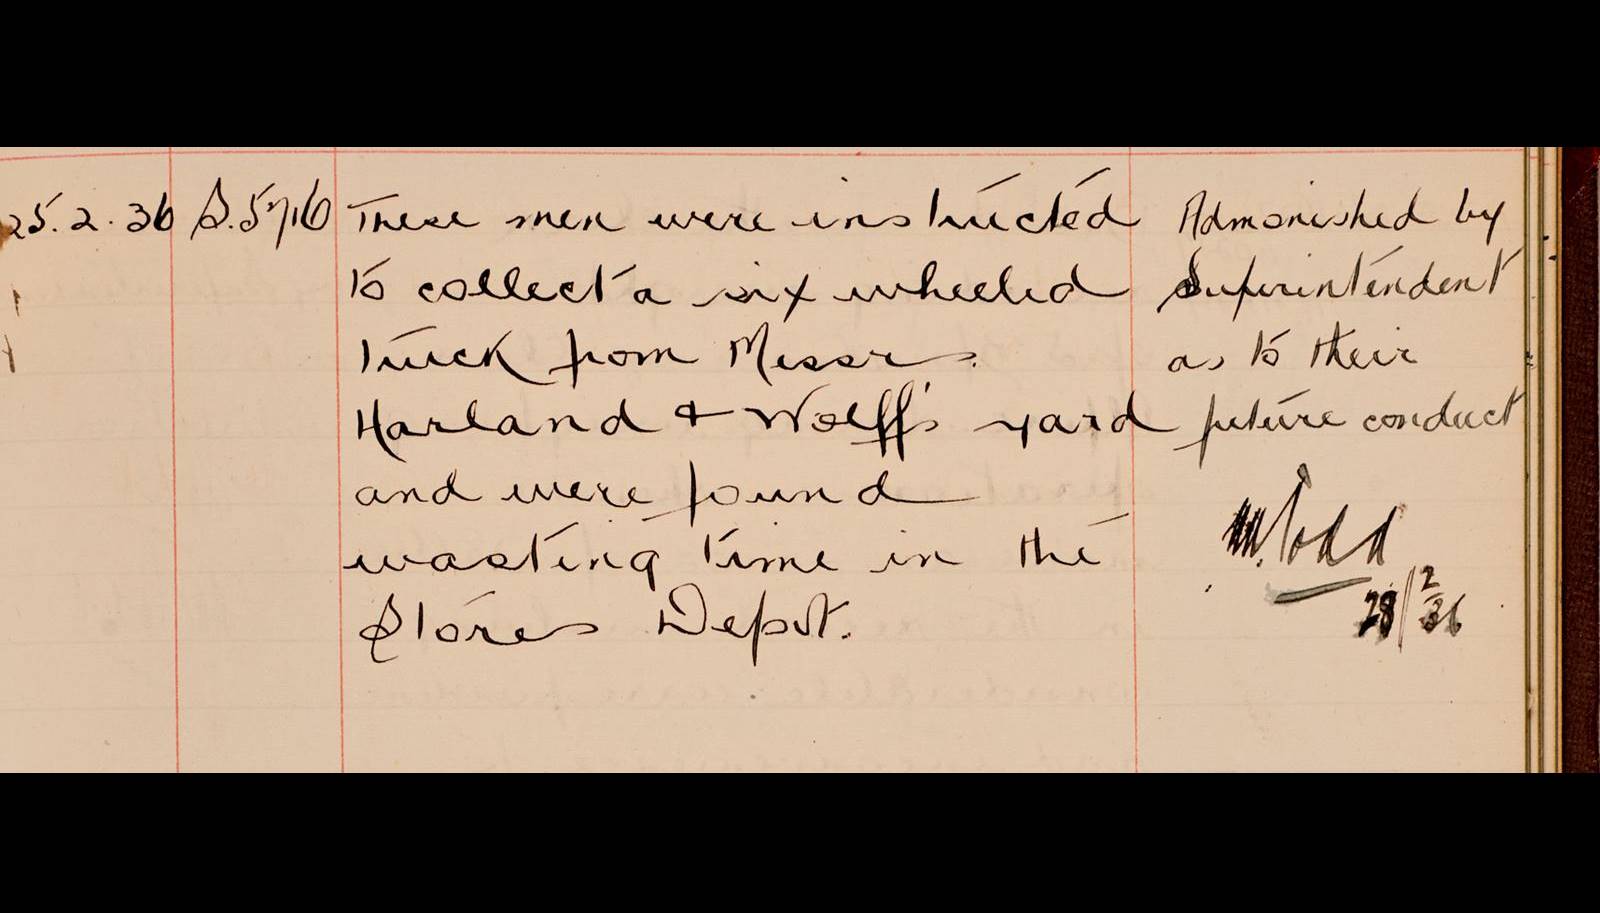 In this July 1903 entry, the person assaulted a hydraulic man and visited the Gallions Hotel during duty hours. He was cautioned, fined and warned. (ID no.: PLA/LIDJC/4/2/1/2)